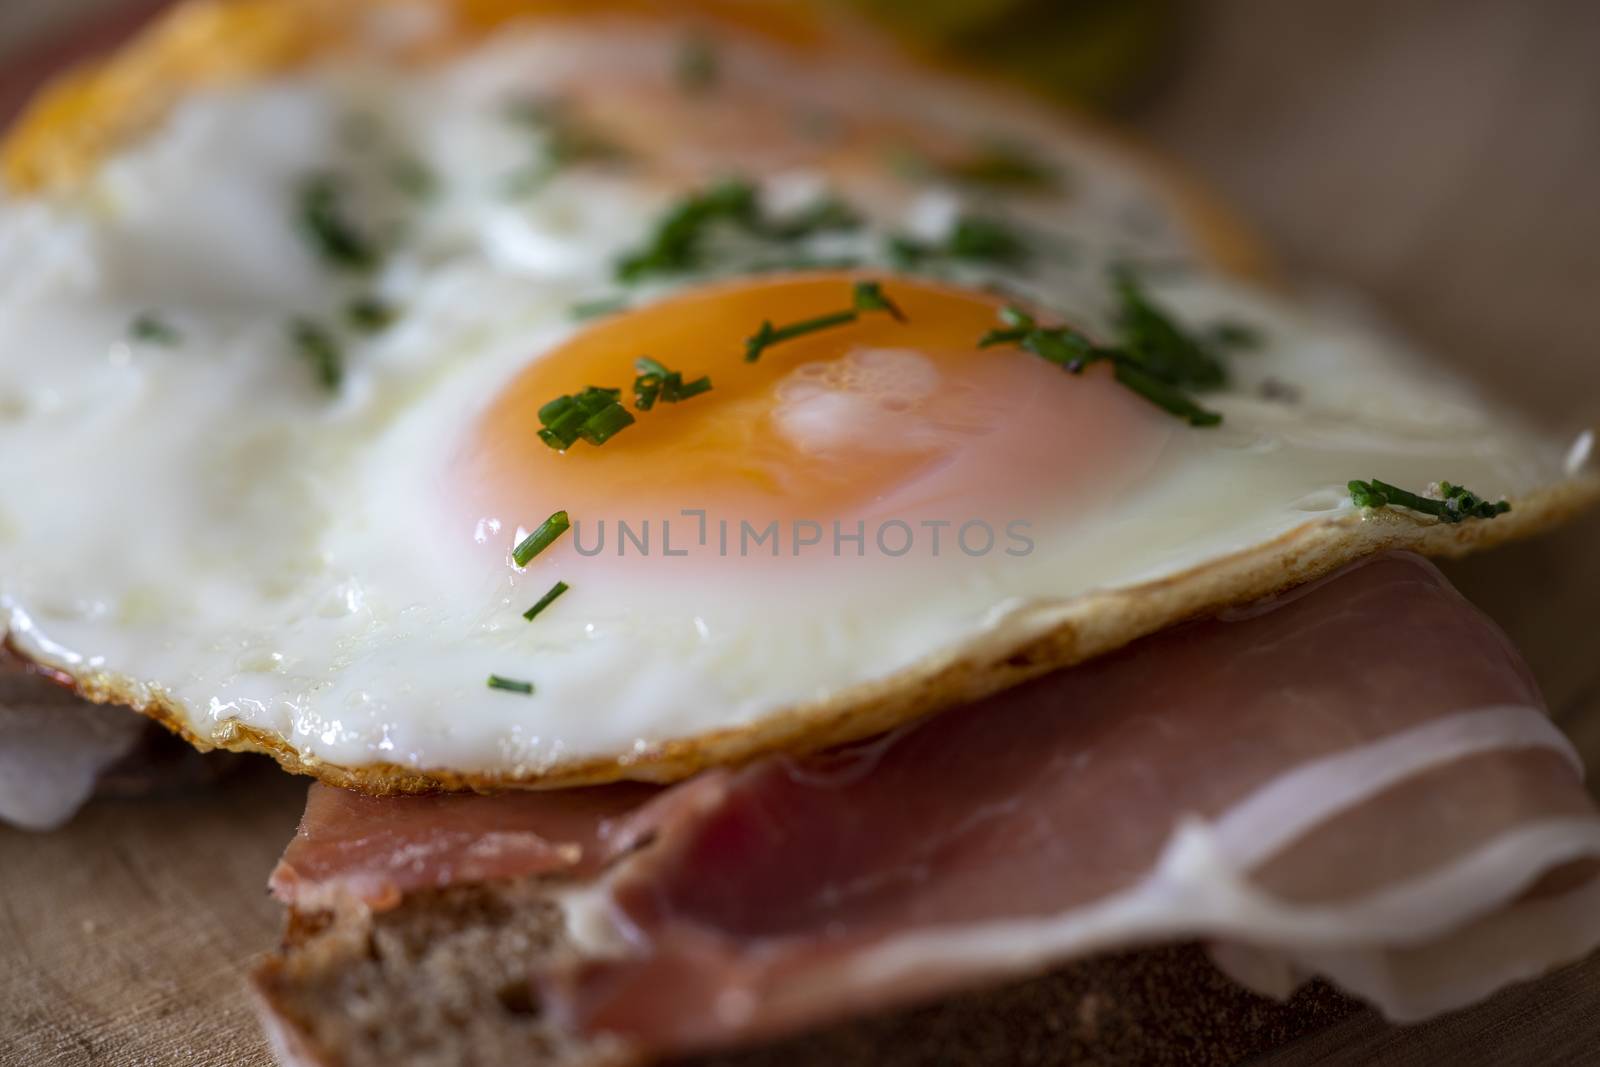 eggs sunny side up on rye bread